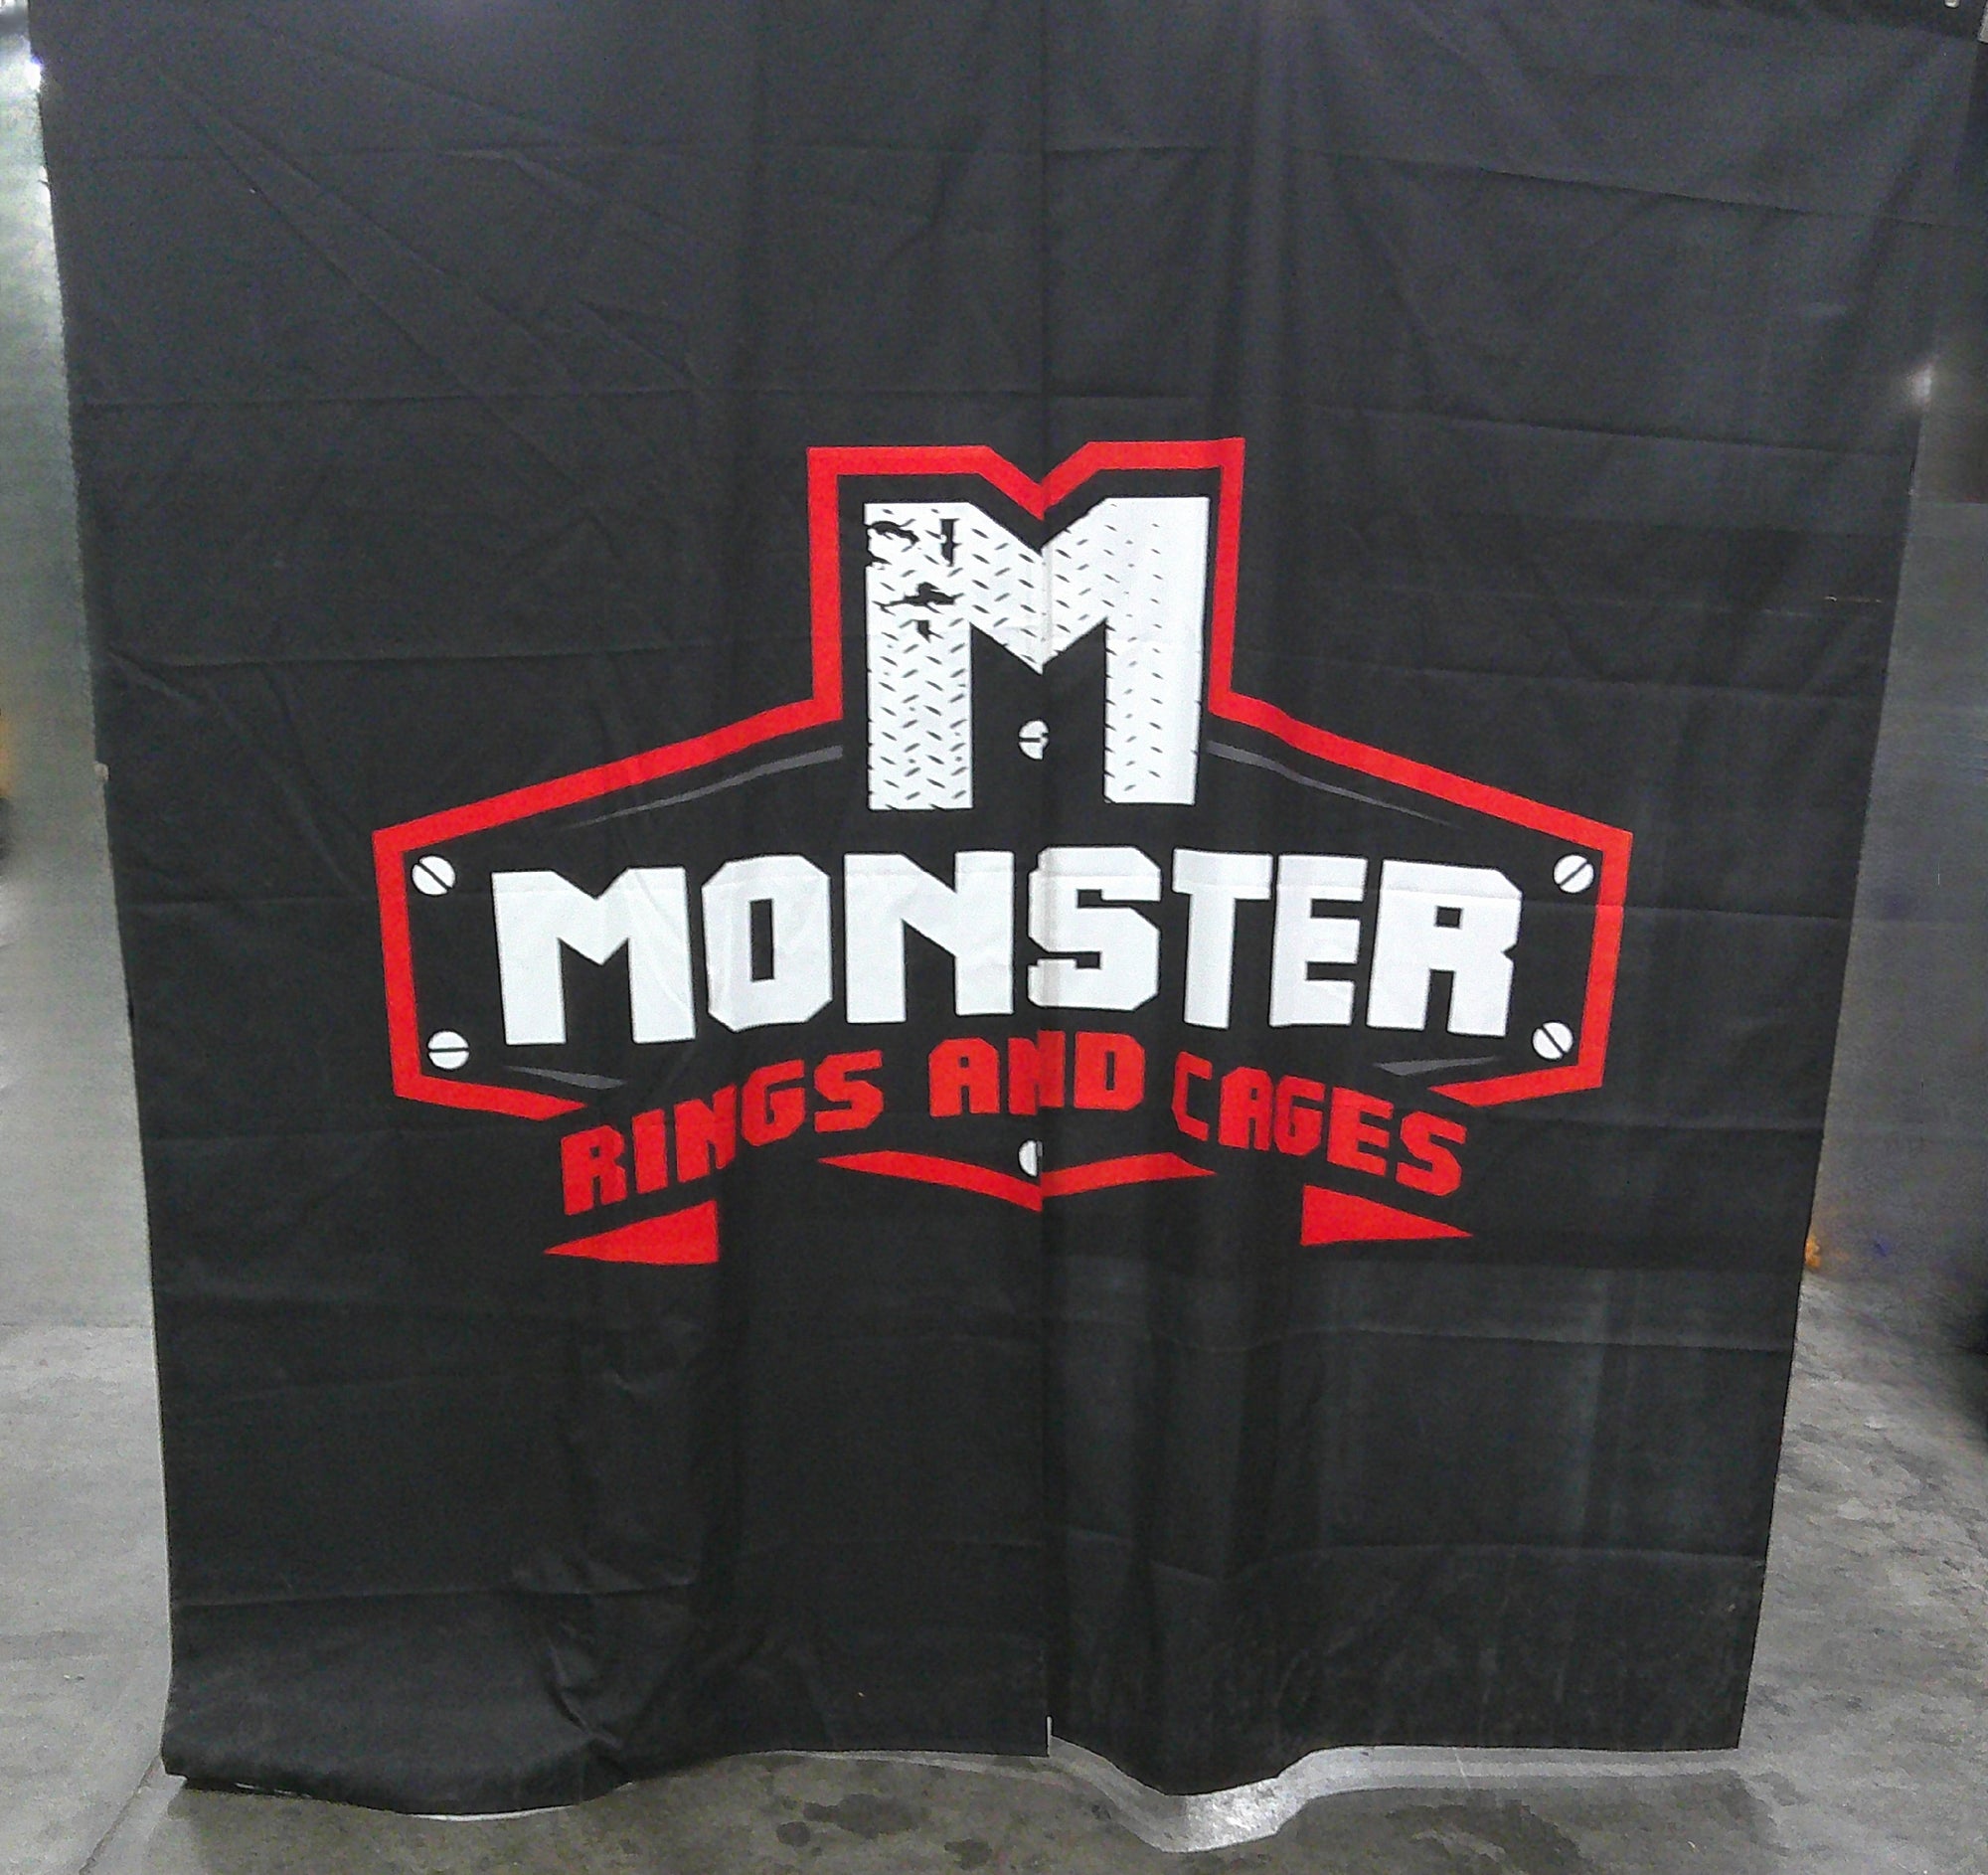 Entrance Curtains for Wrestling, custom printed at Monster Rings and Cages